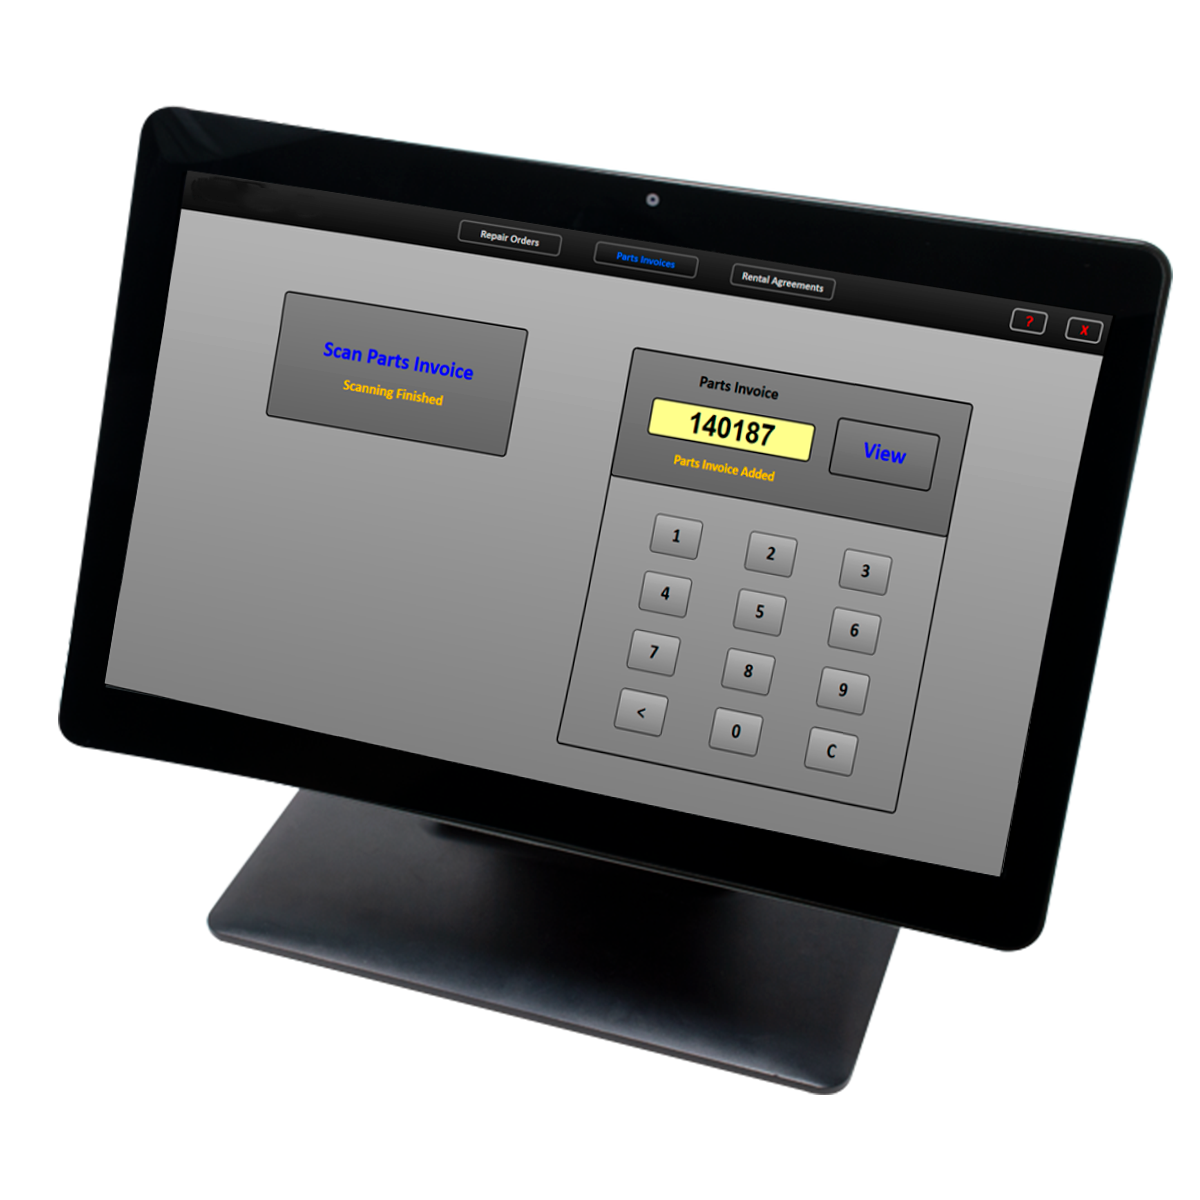 Parts Invoice Scanning Station